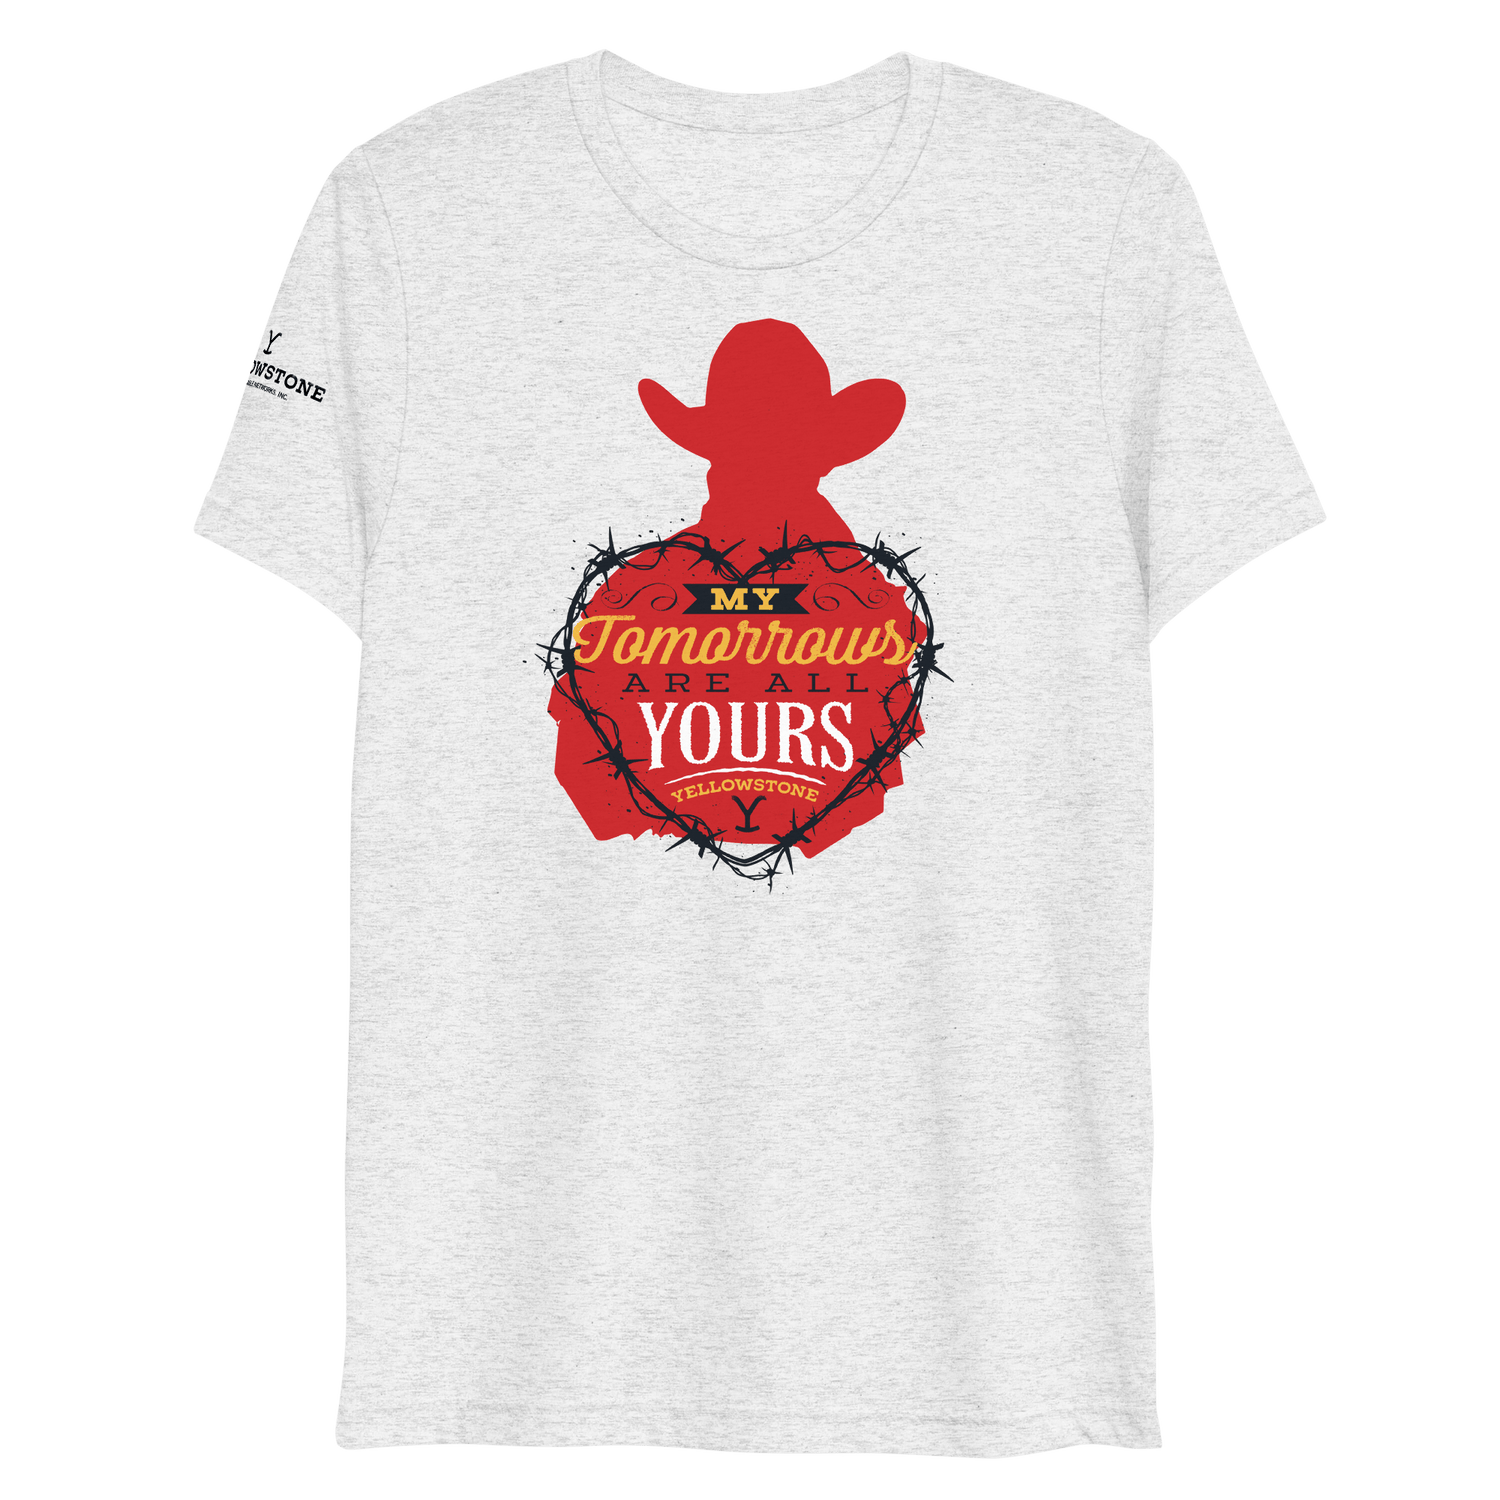 Yellowstone My Tomorrows Are All Yours Cowboy Unisex Tri - Blend T - Shirt - Paramount Shop